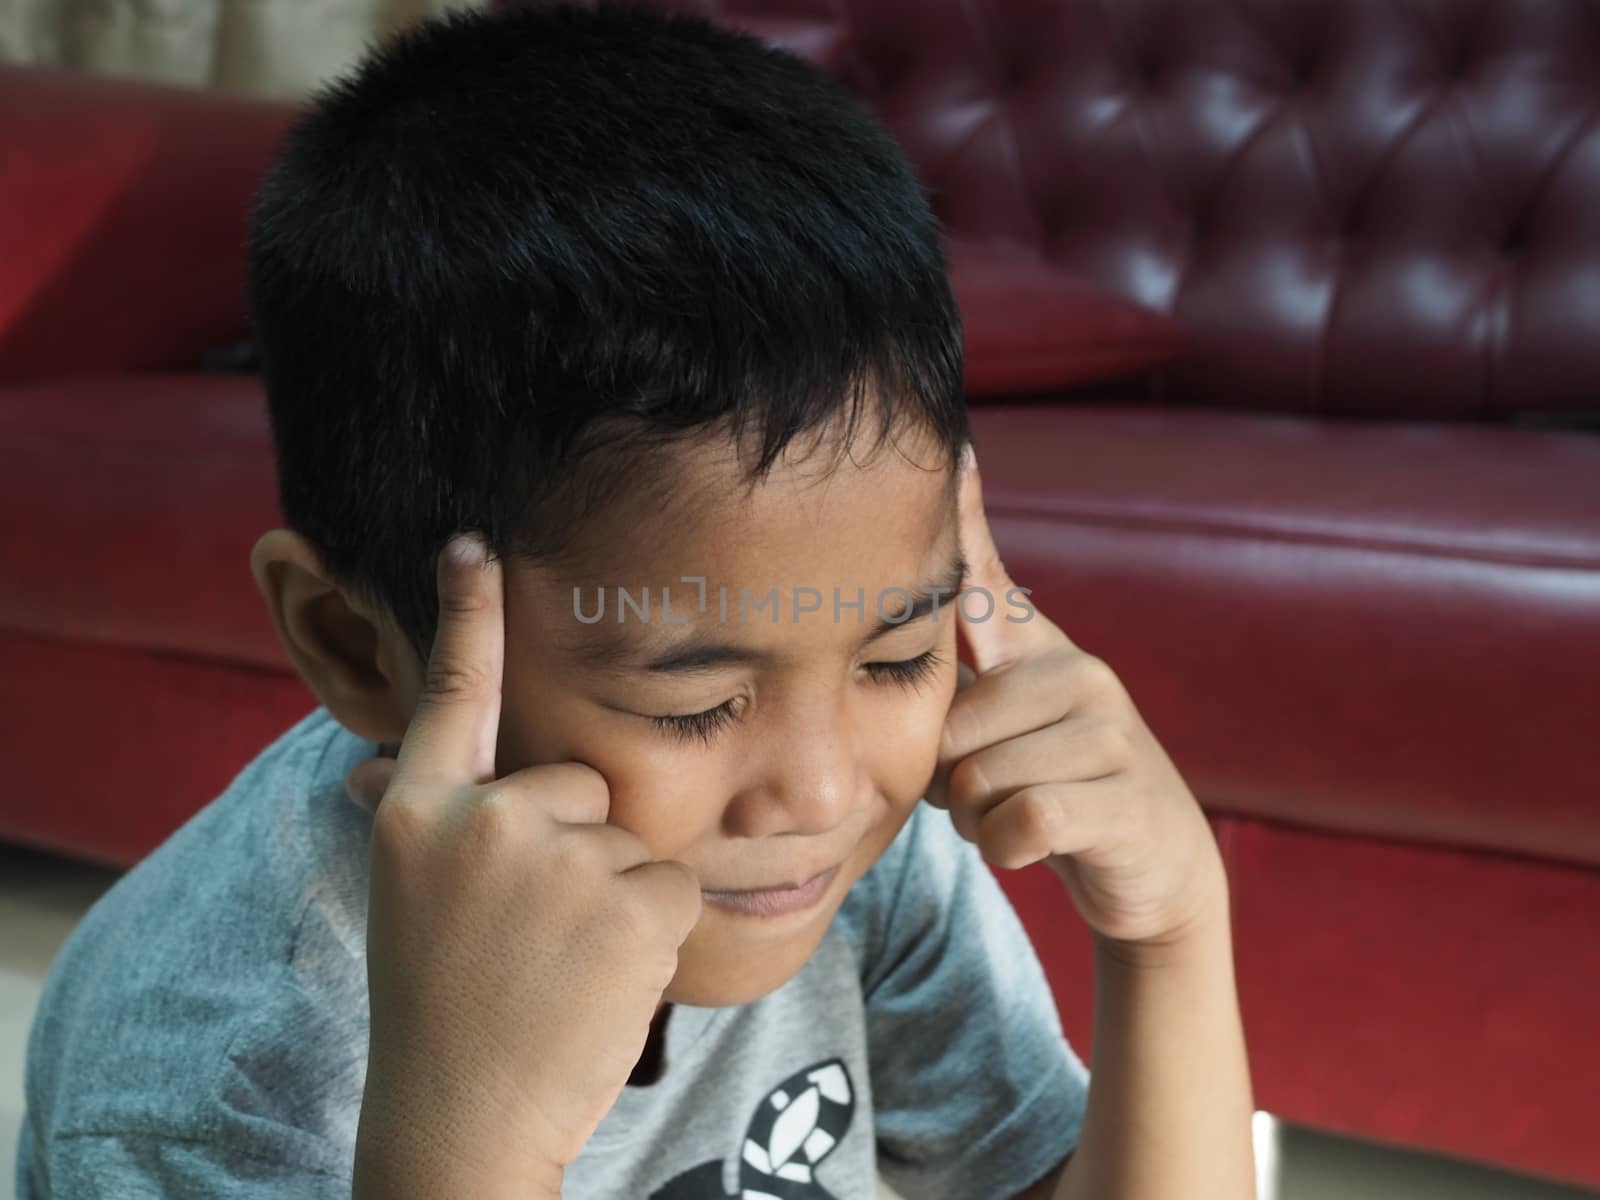 A boy in a headache On the background of the red sofa in the hou by Unimages2527